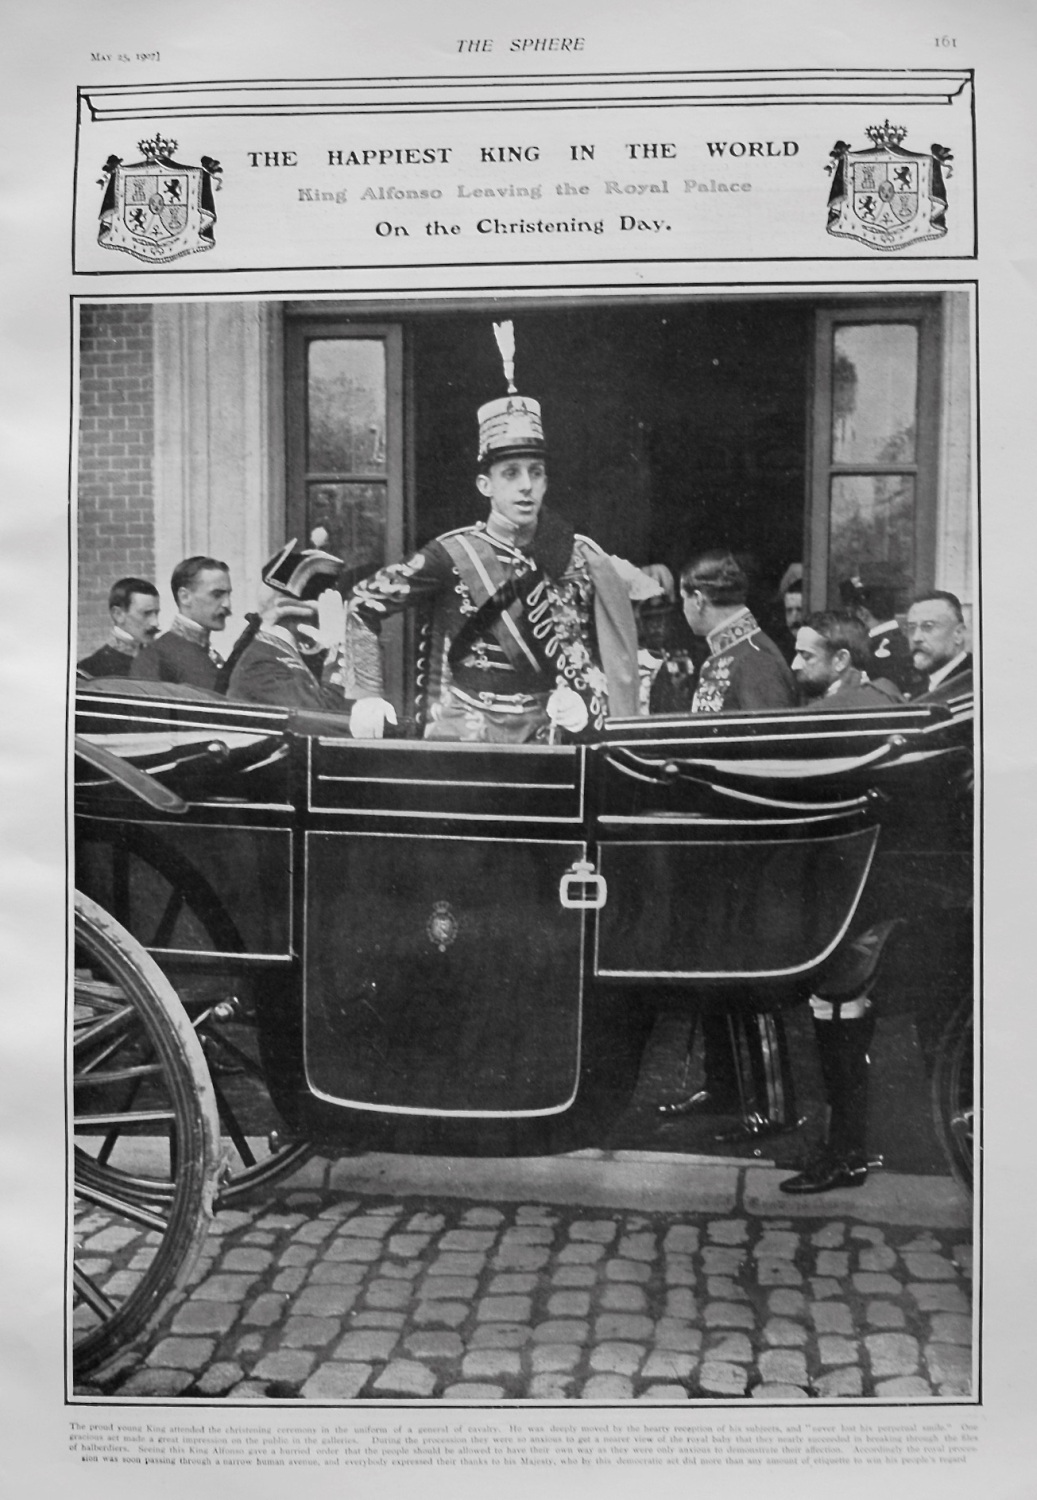 The Happiest King in the World : King Alfonso Leaving the Royal Palace on t